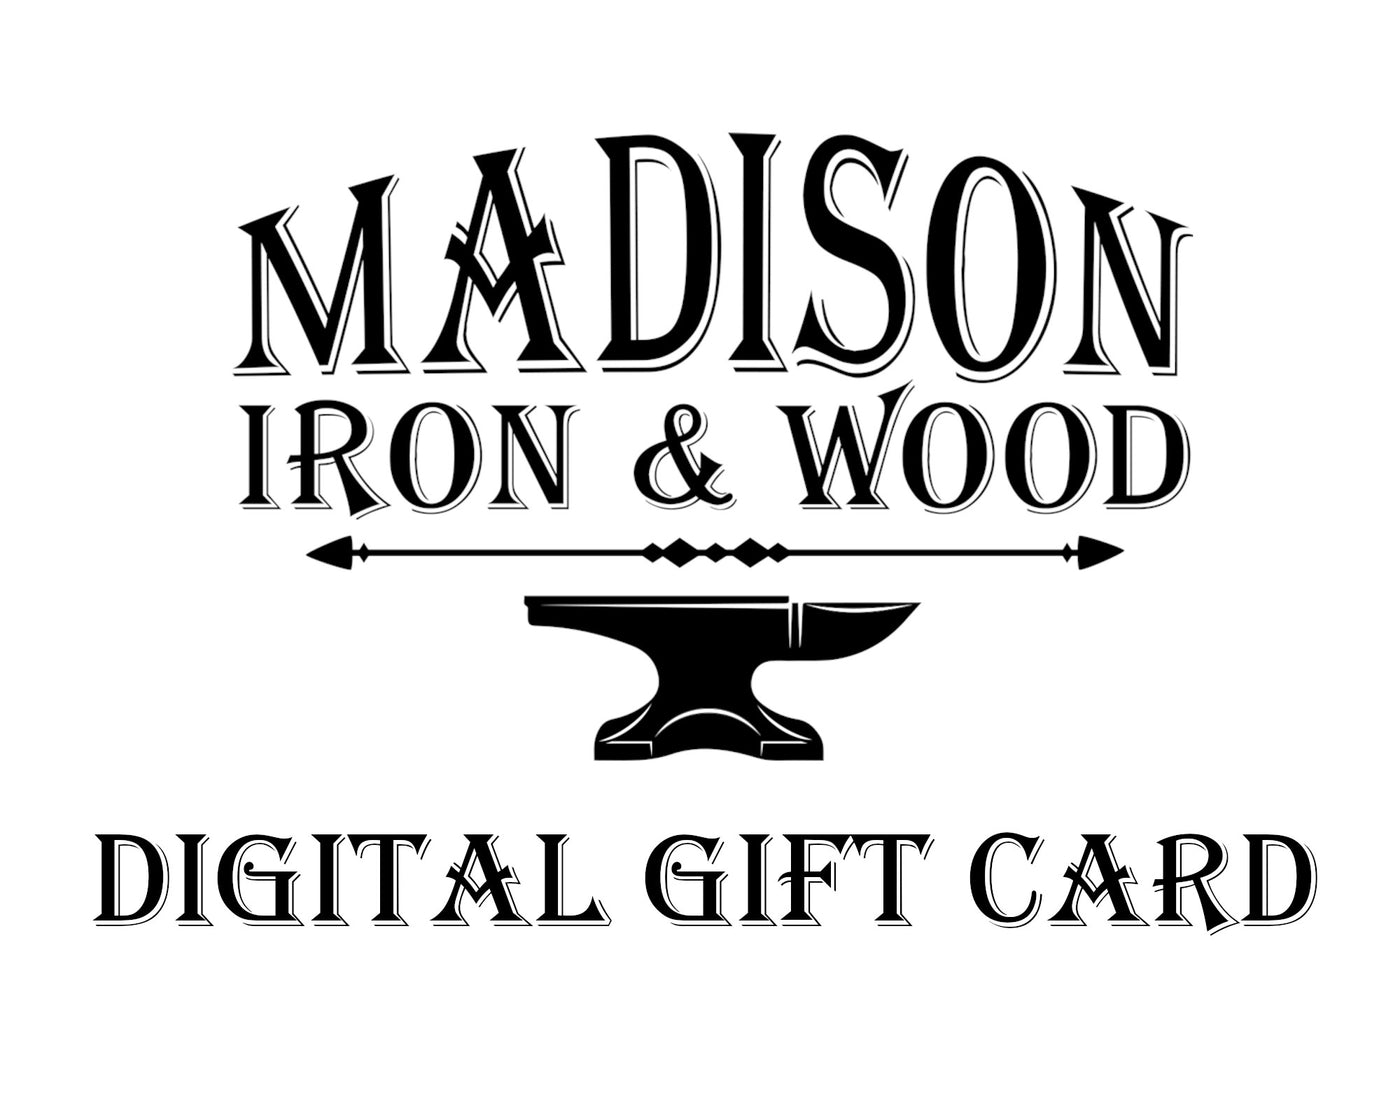 Madison Iron and Wood Gift Card - Madison Iron and Wood - Gift Cards - metal outdoor decor - Steel deocrations - american made products - veteran owned business products - fencing decorations - fencing supplies - custom wall decorations - personalized wall signs - steel - decorative post caps - steel post caps - metal post caps - brackets - structural brackets - home improvement - easter - easter decorations - easter gift - easter yard decor